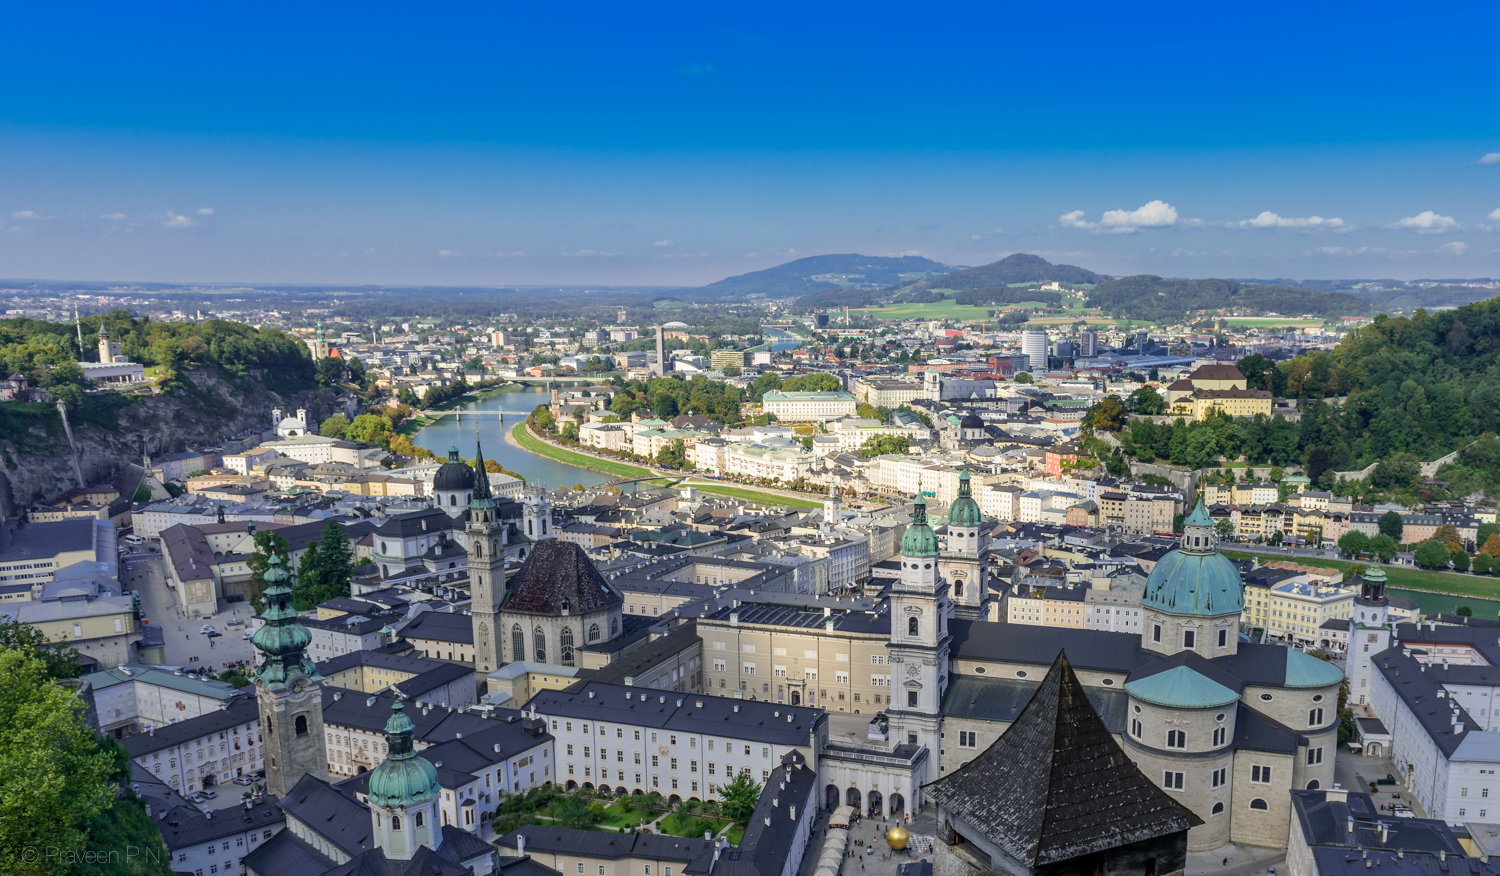 View from Hohensalzburg castle